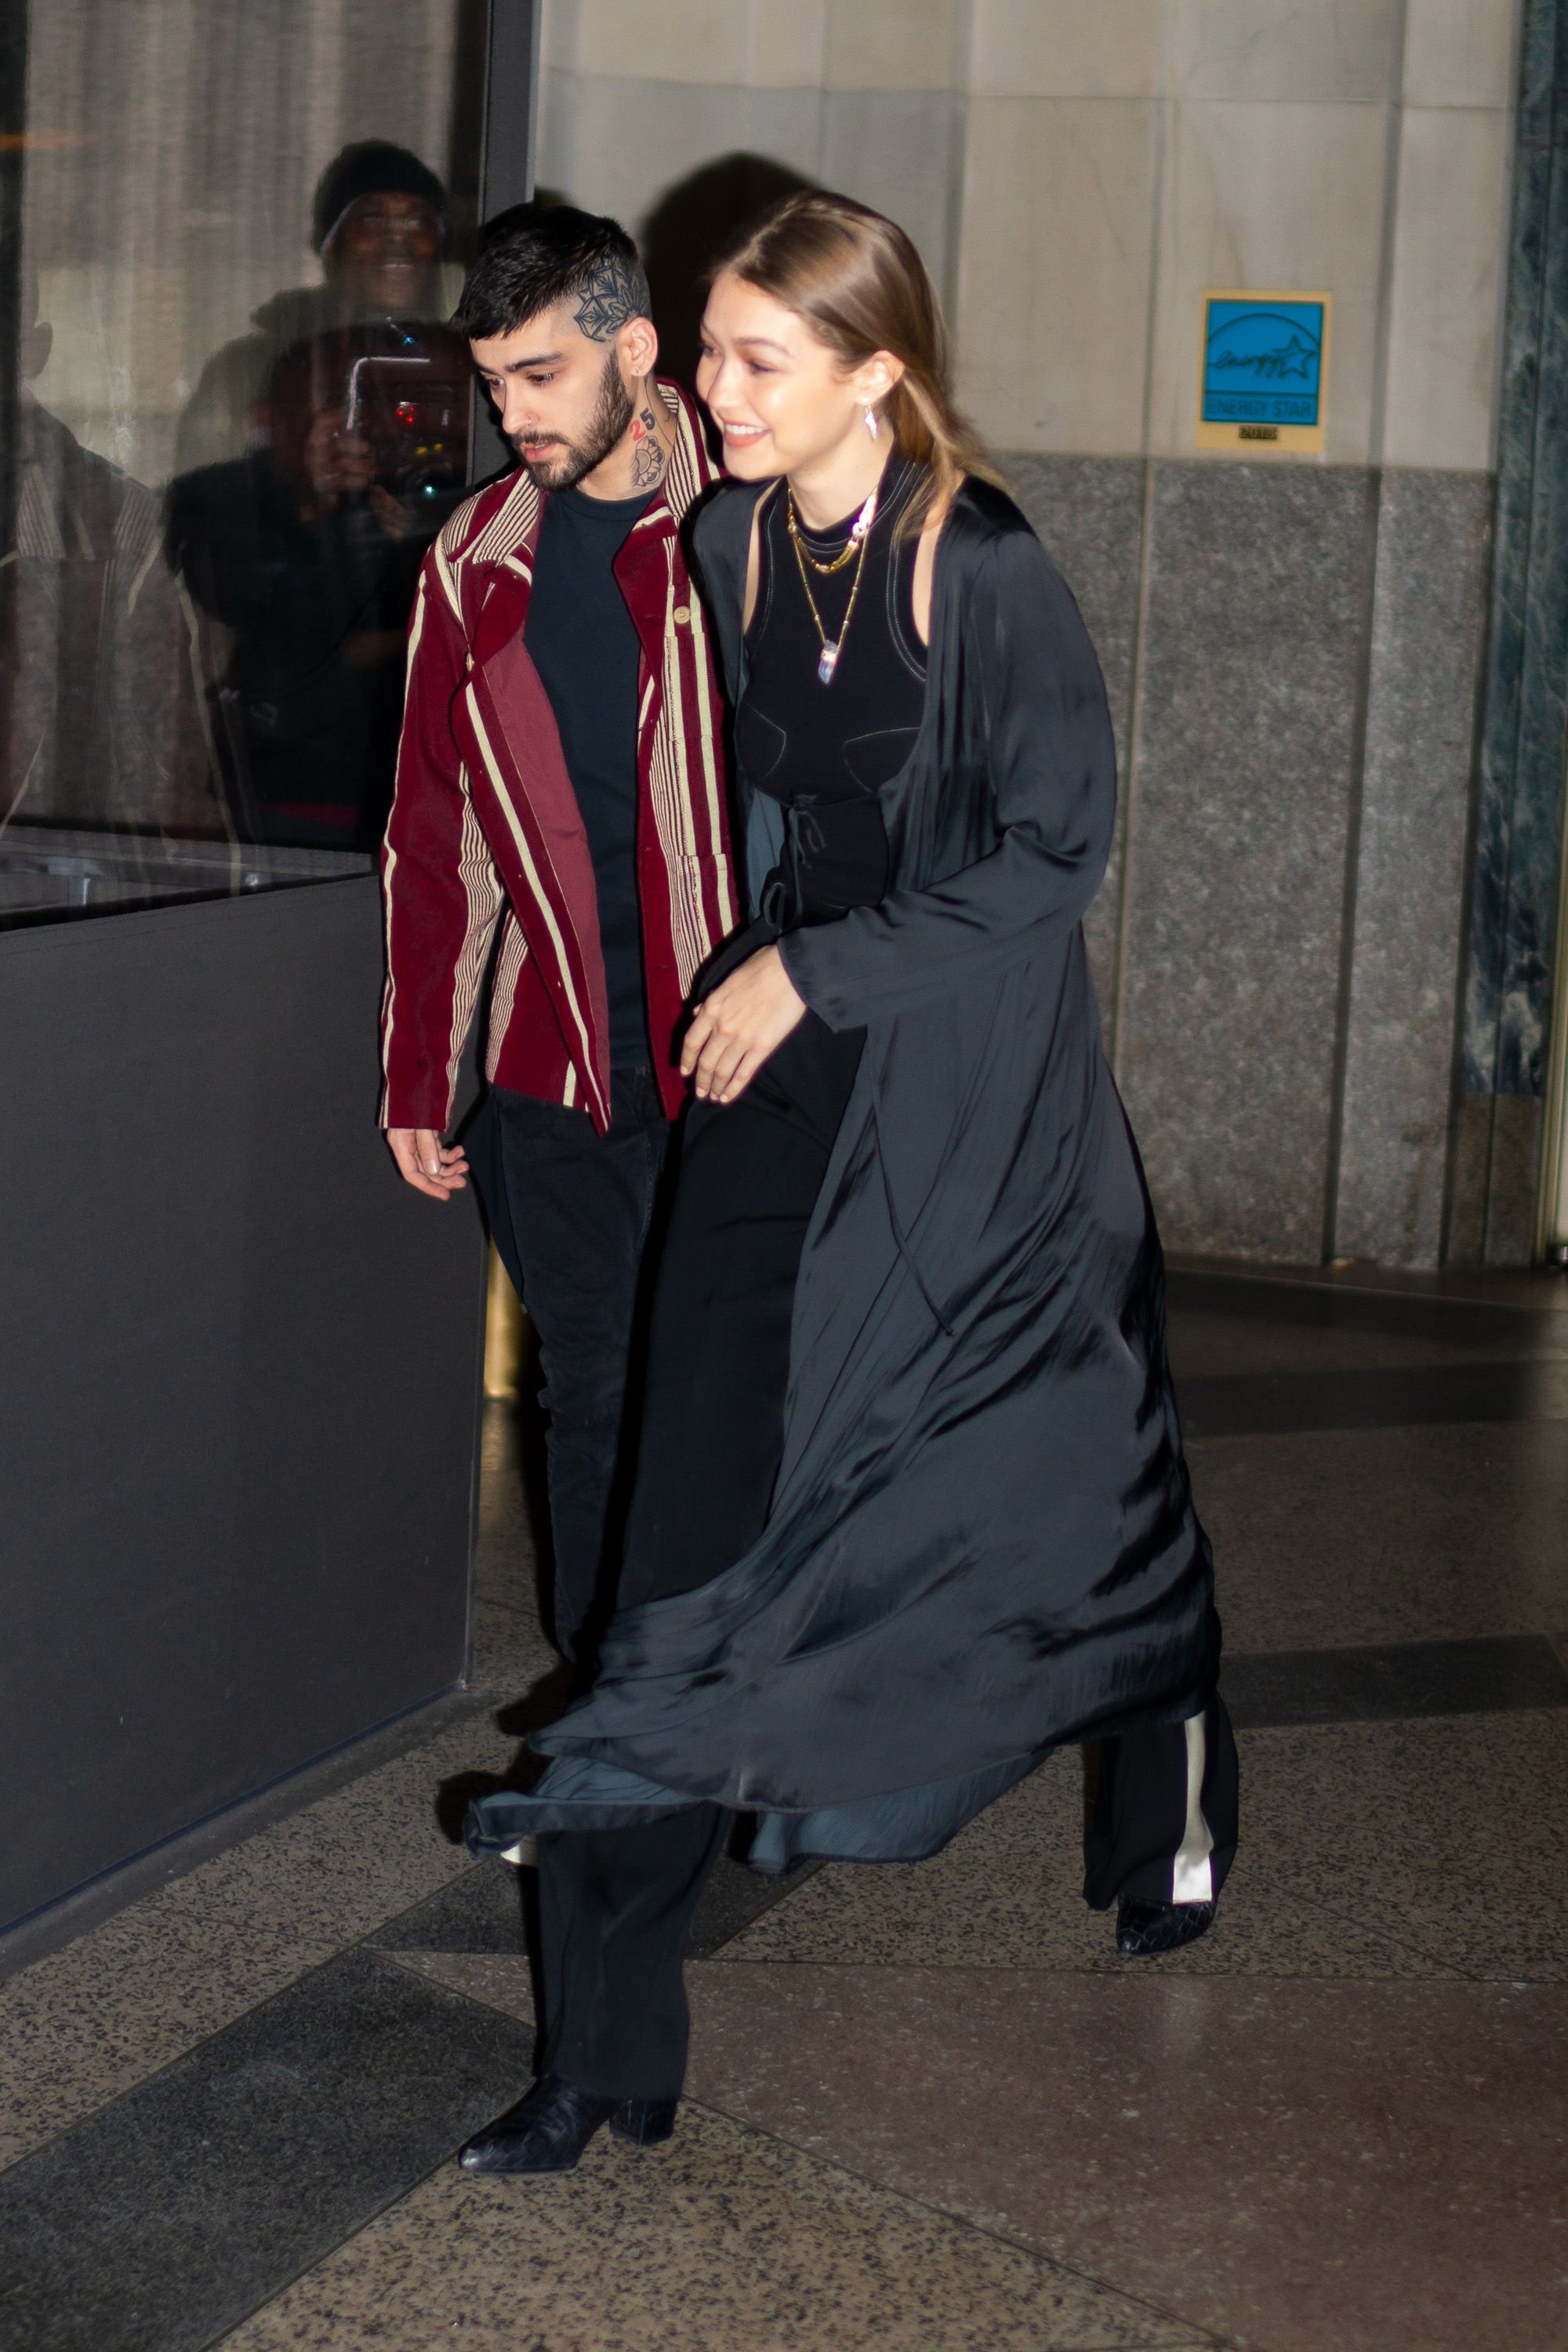 What You Missed on Late Night: Gigi Hadid Confirms Pregnancy on